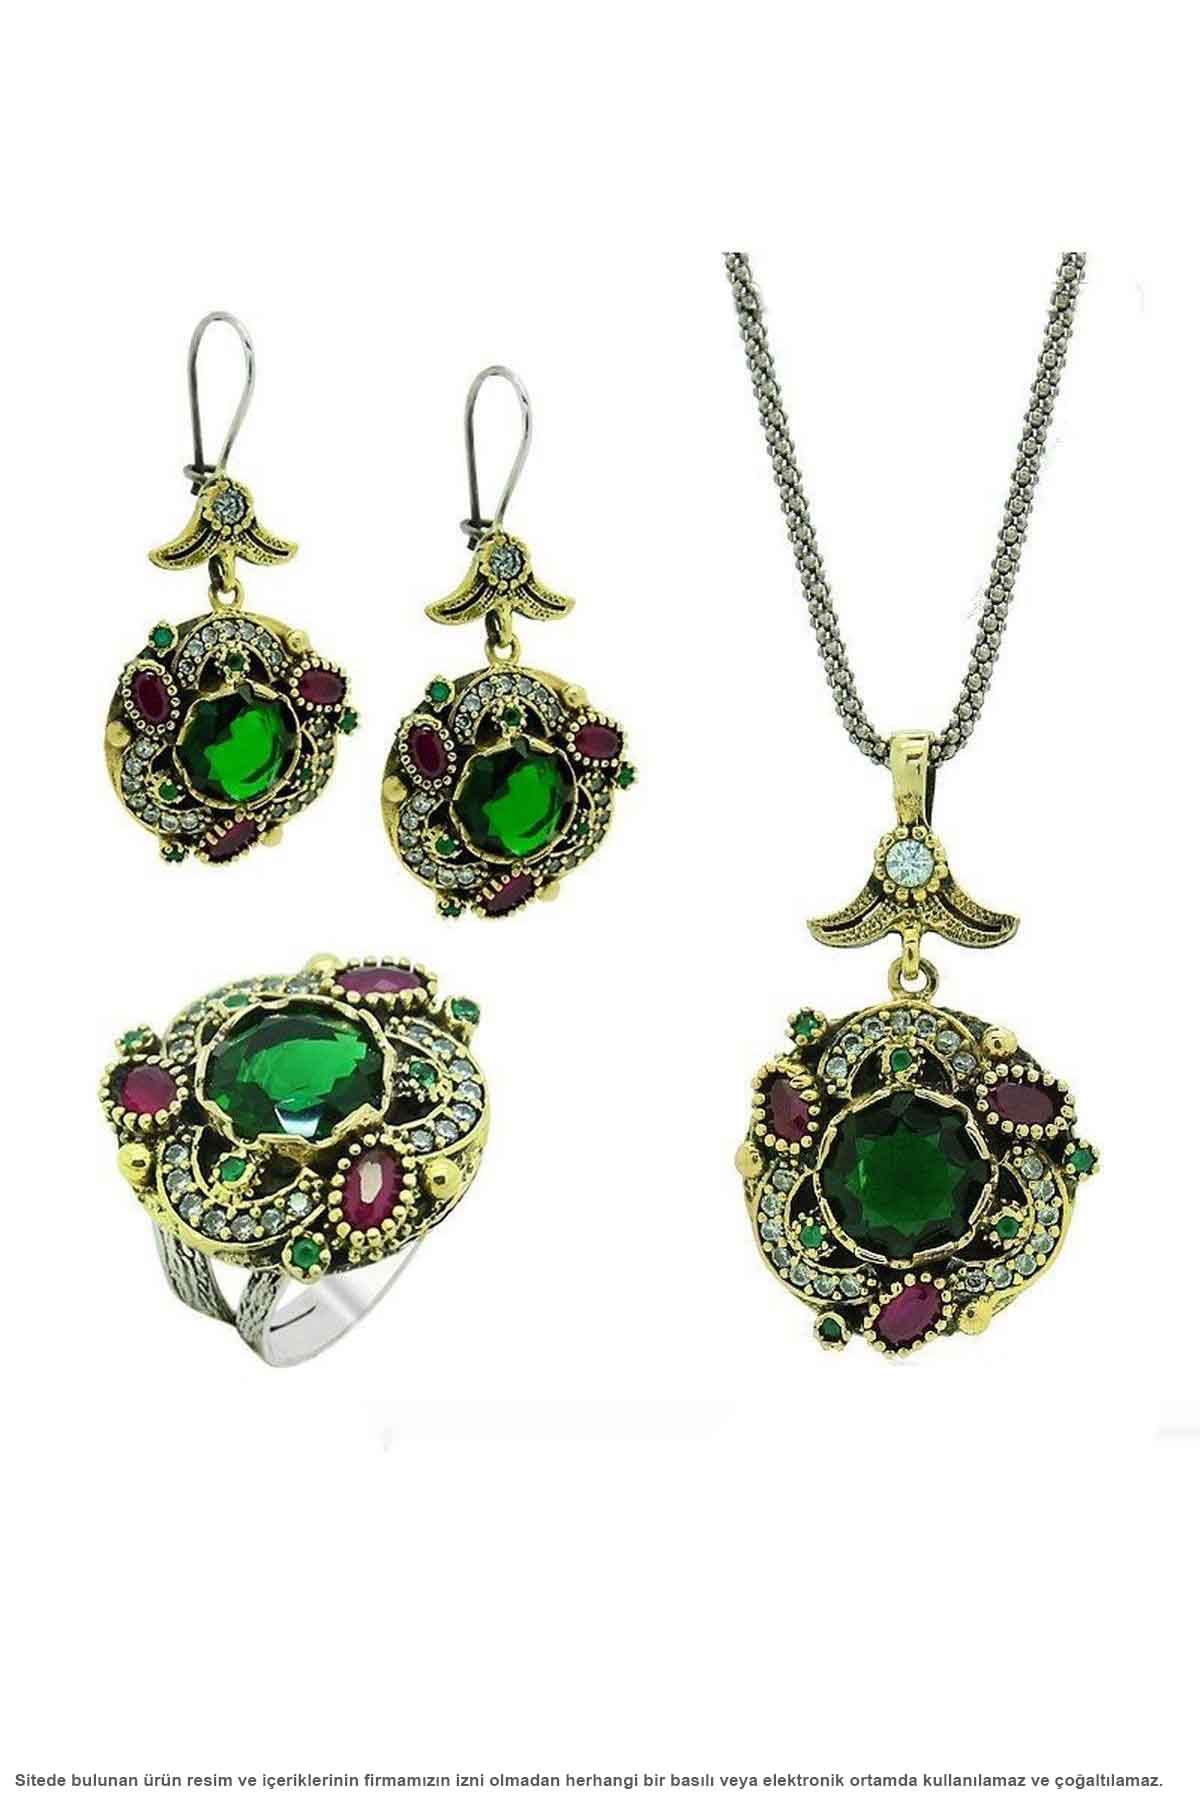 Behiye Series Authentic Silver Jade Stone Set Women's Jewelry Sets Handcrafted Production Midyat Jewelry